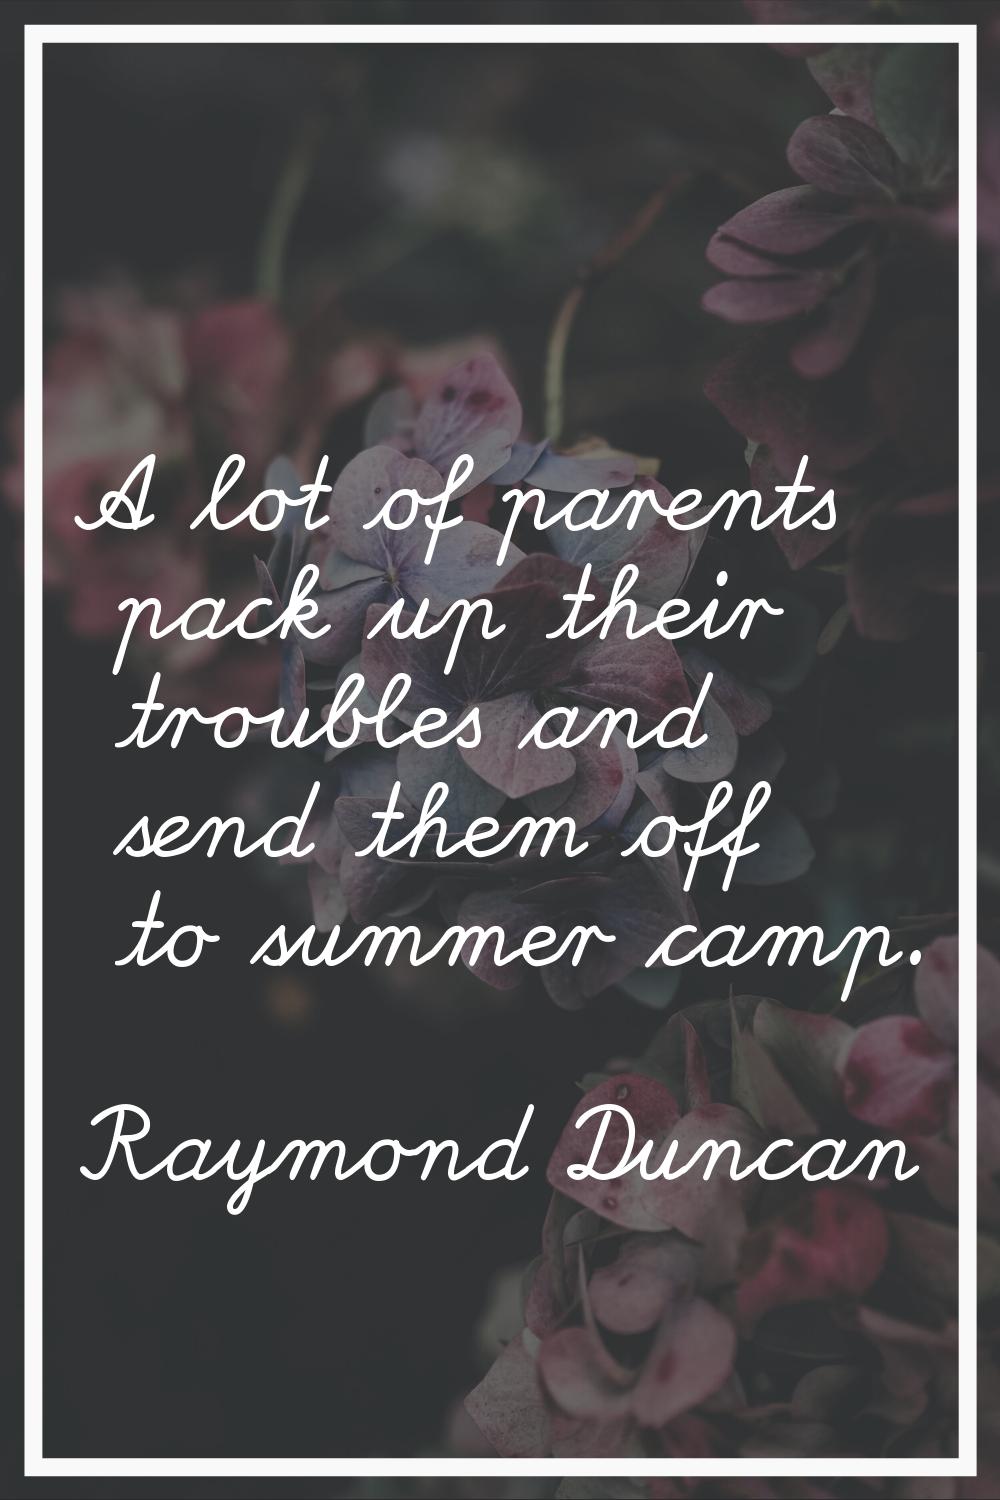 A lot of parents pack up their troubles and send them off to summer camp.